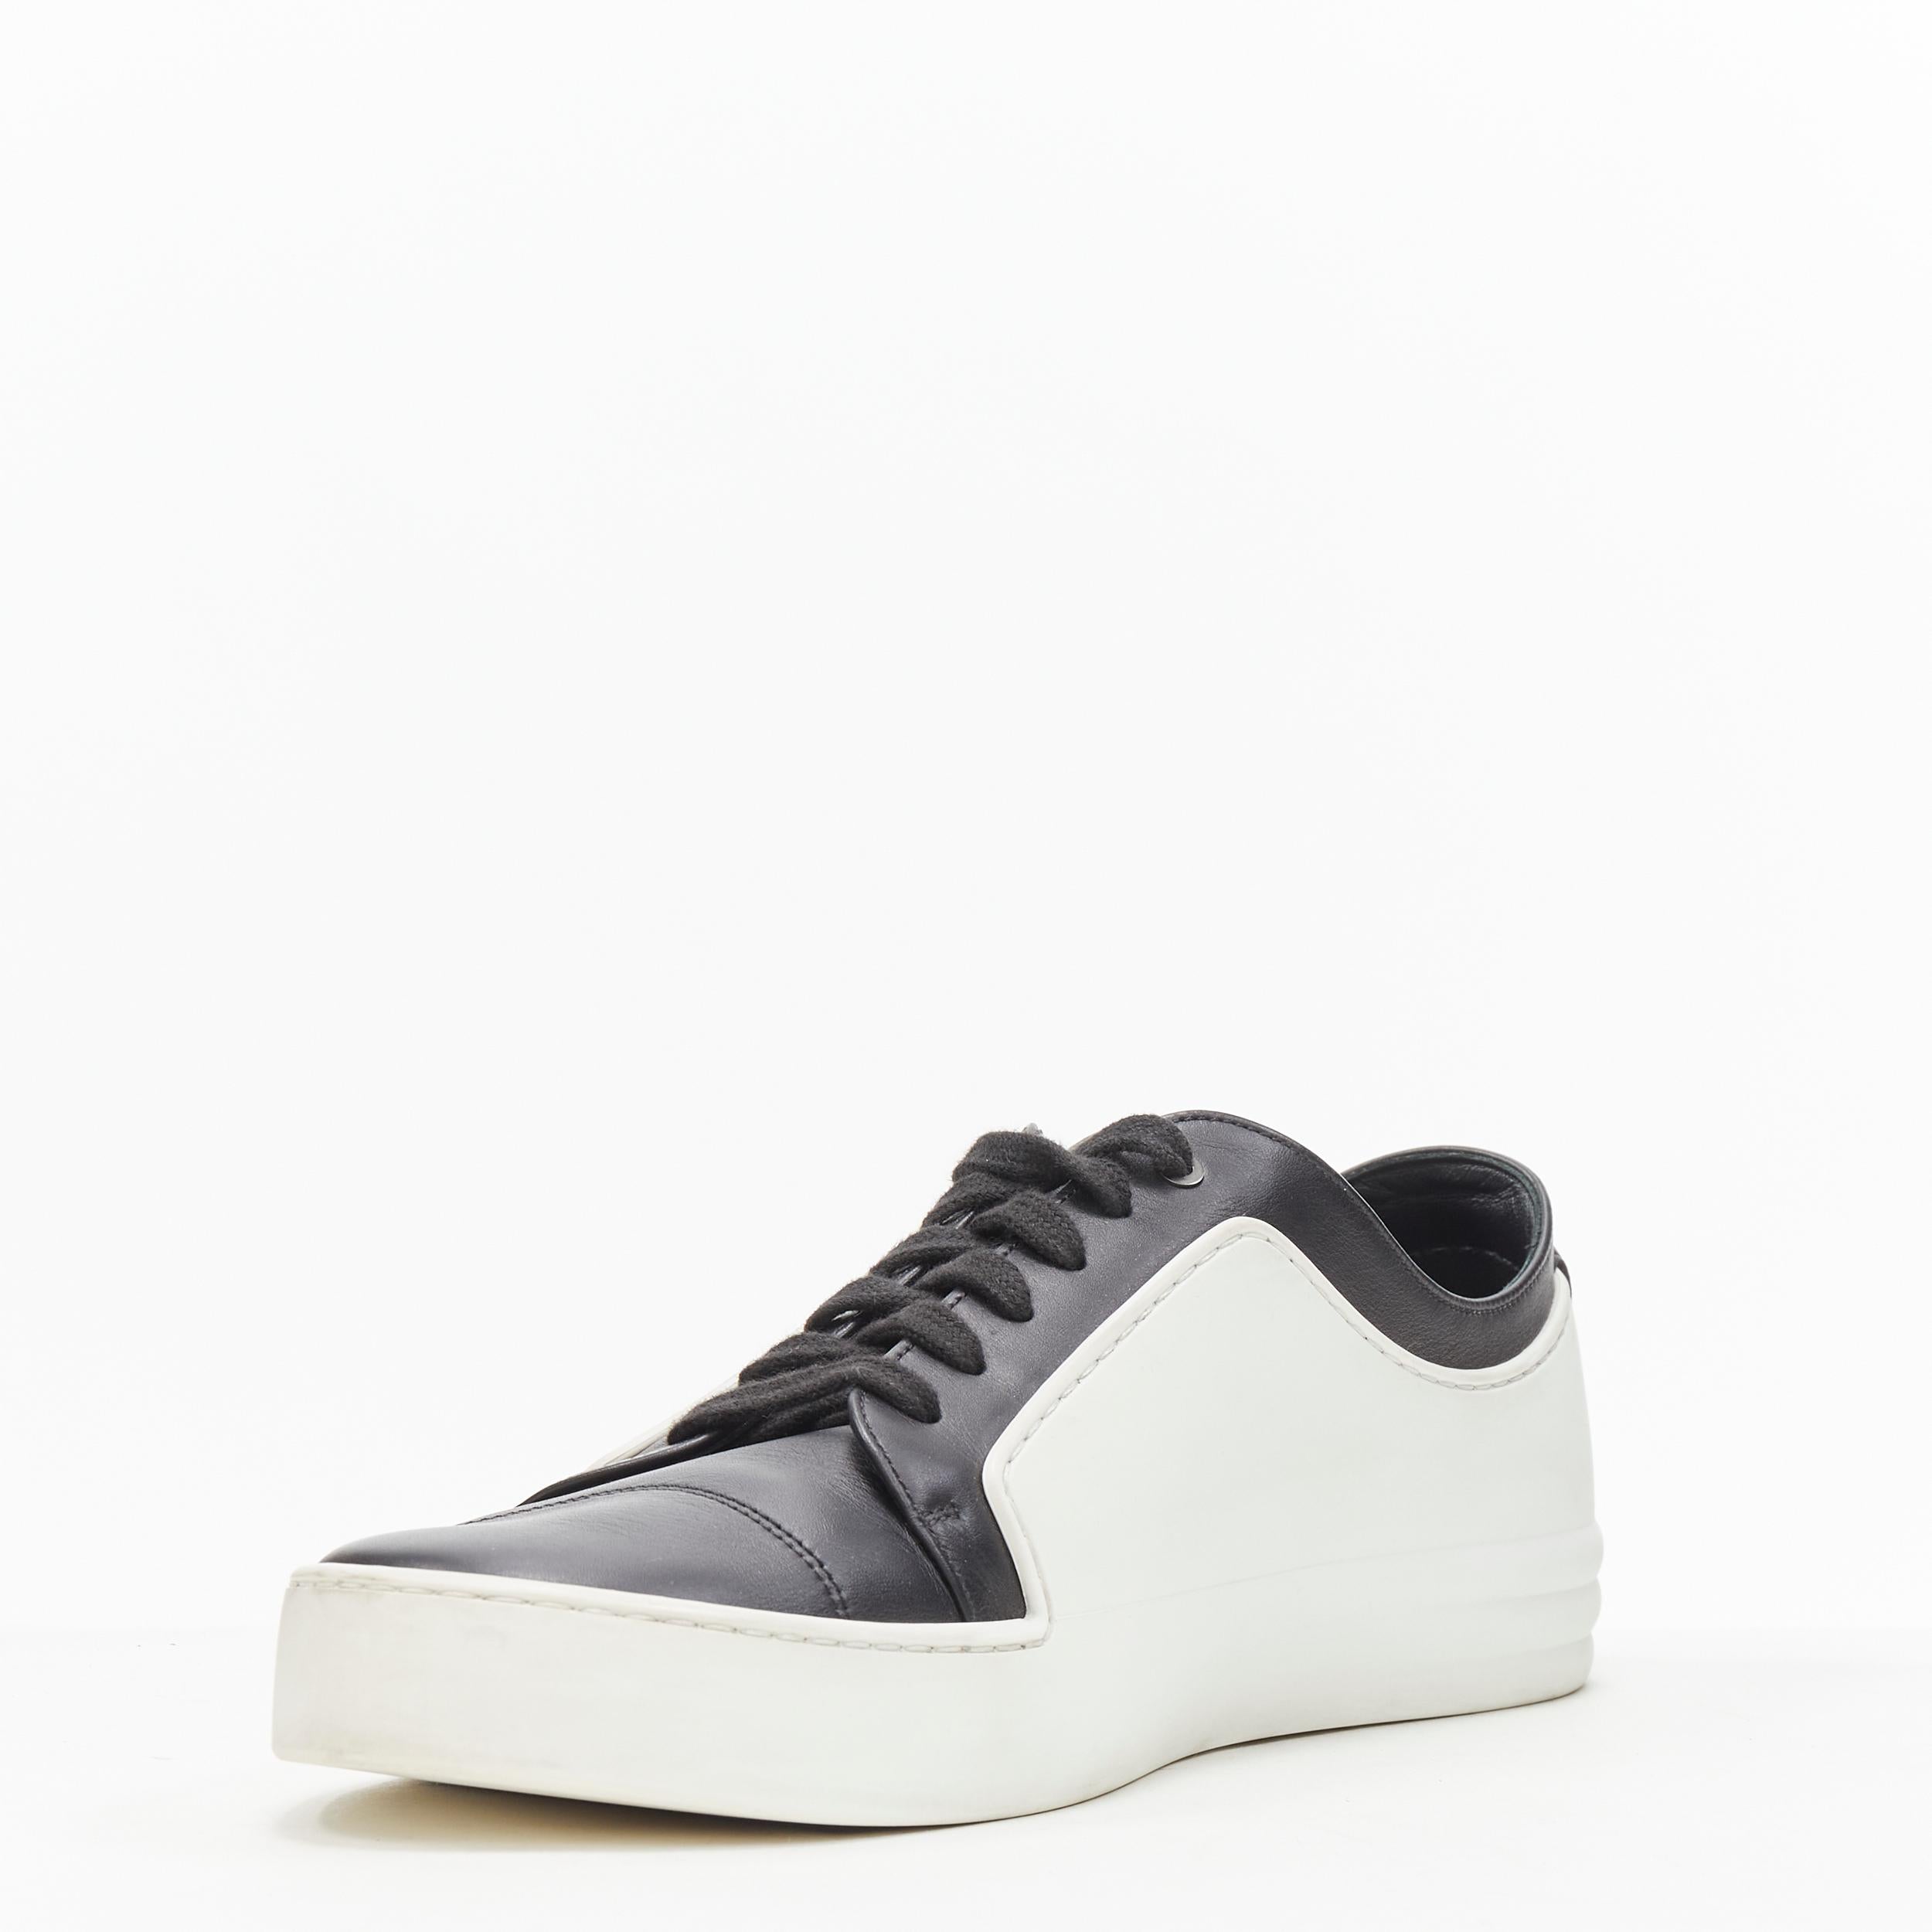 chanel men's shoes black and white